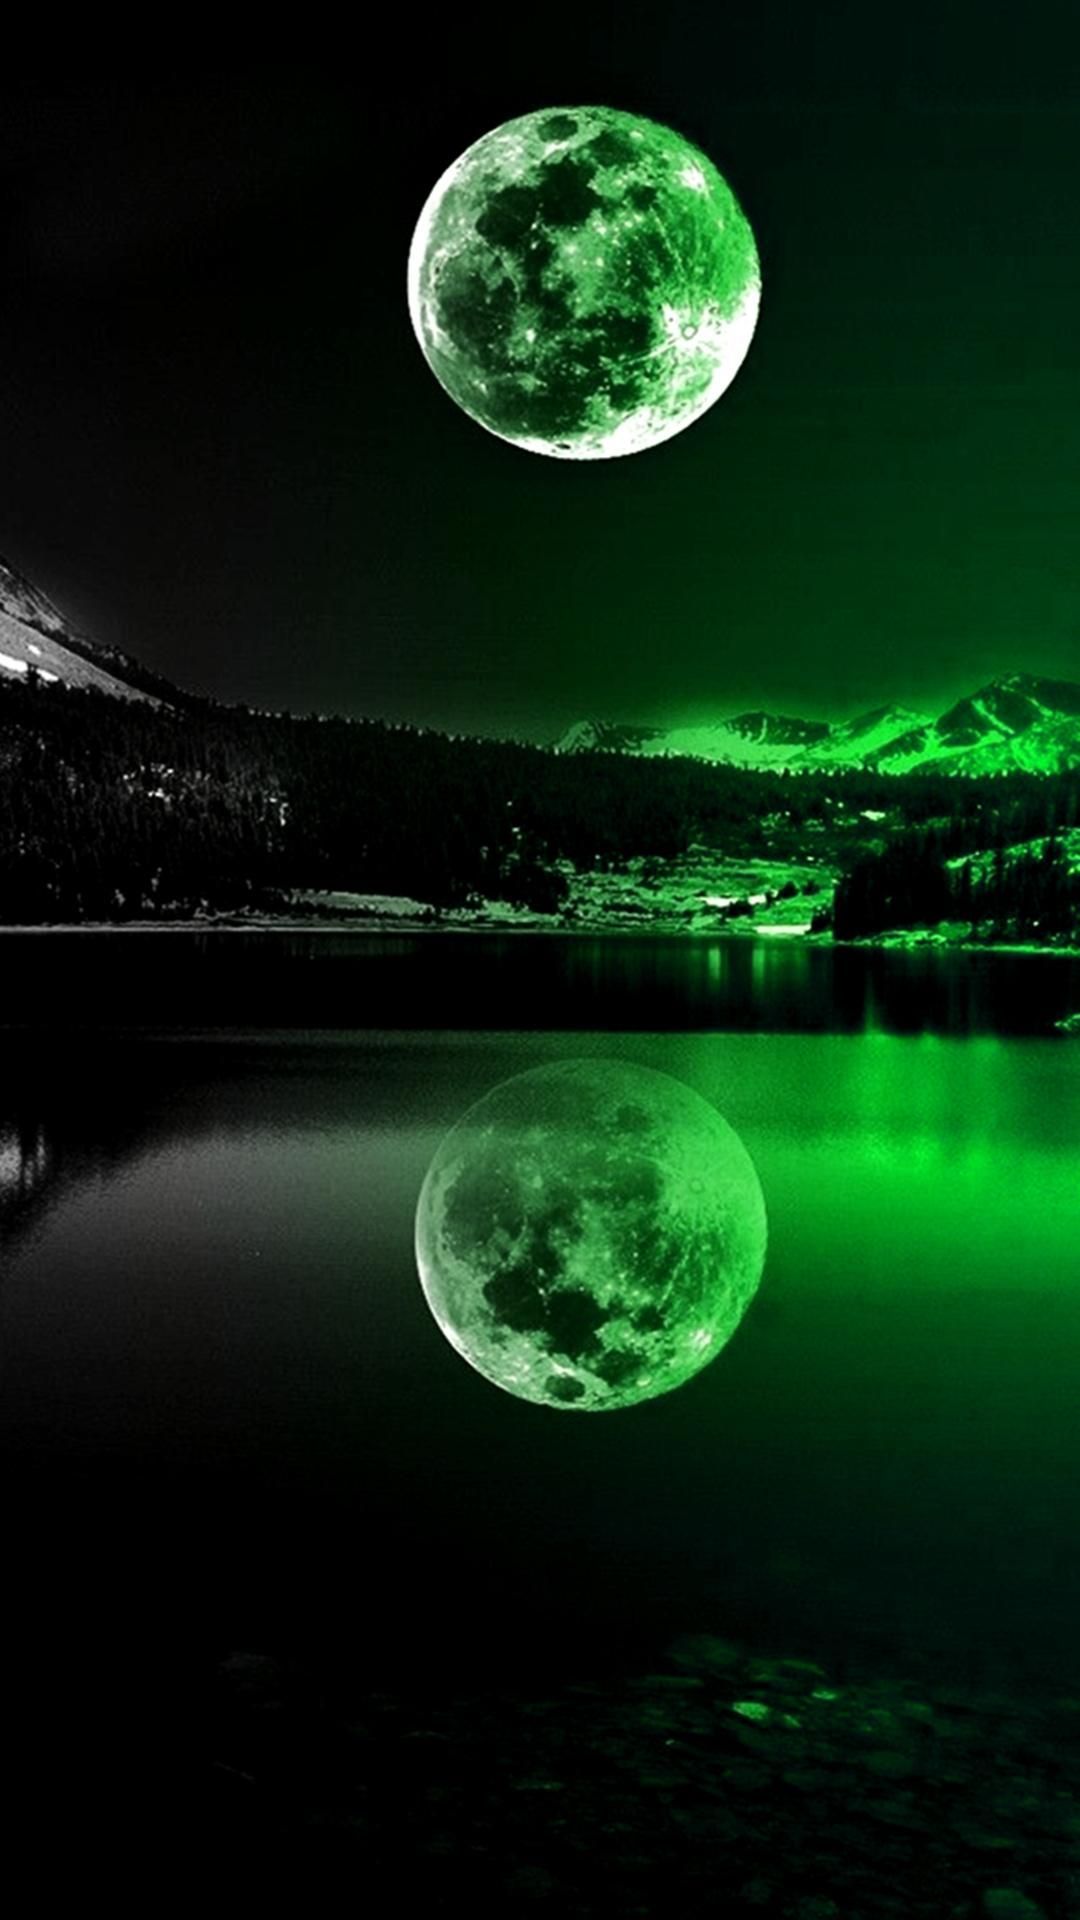 Night Green Wallpapers